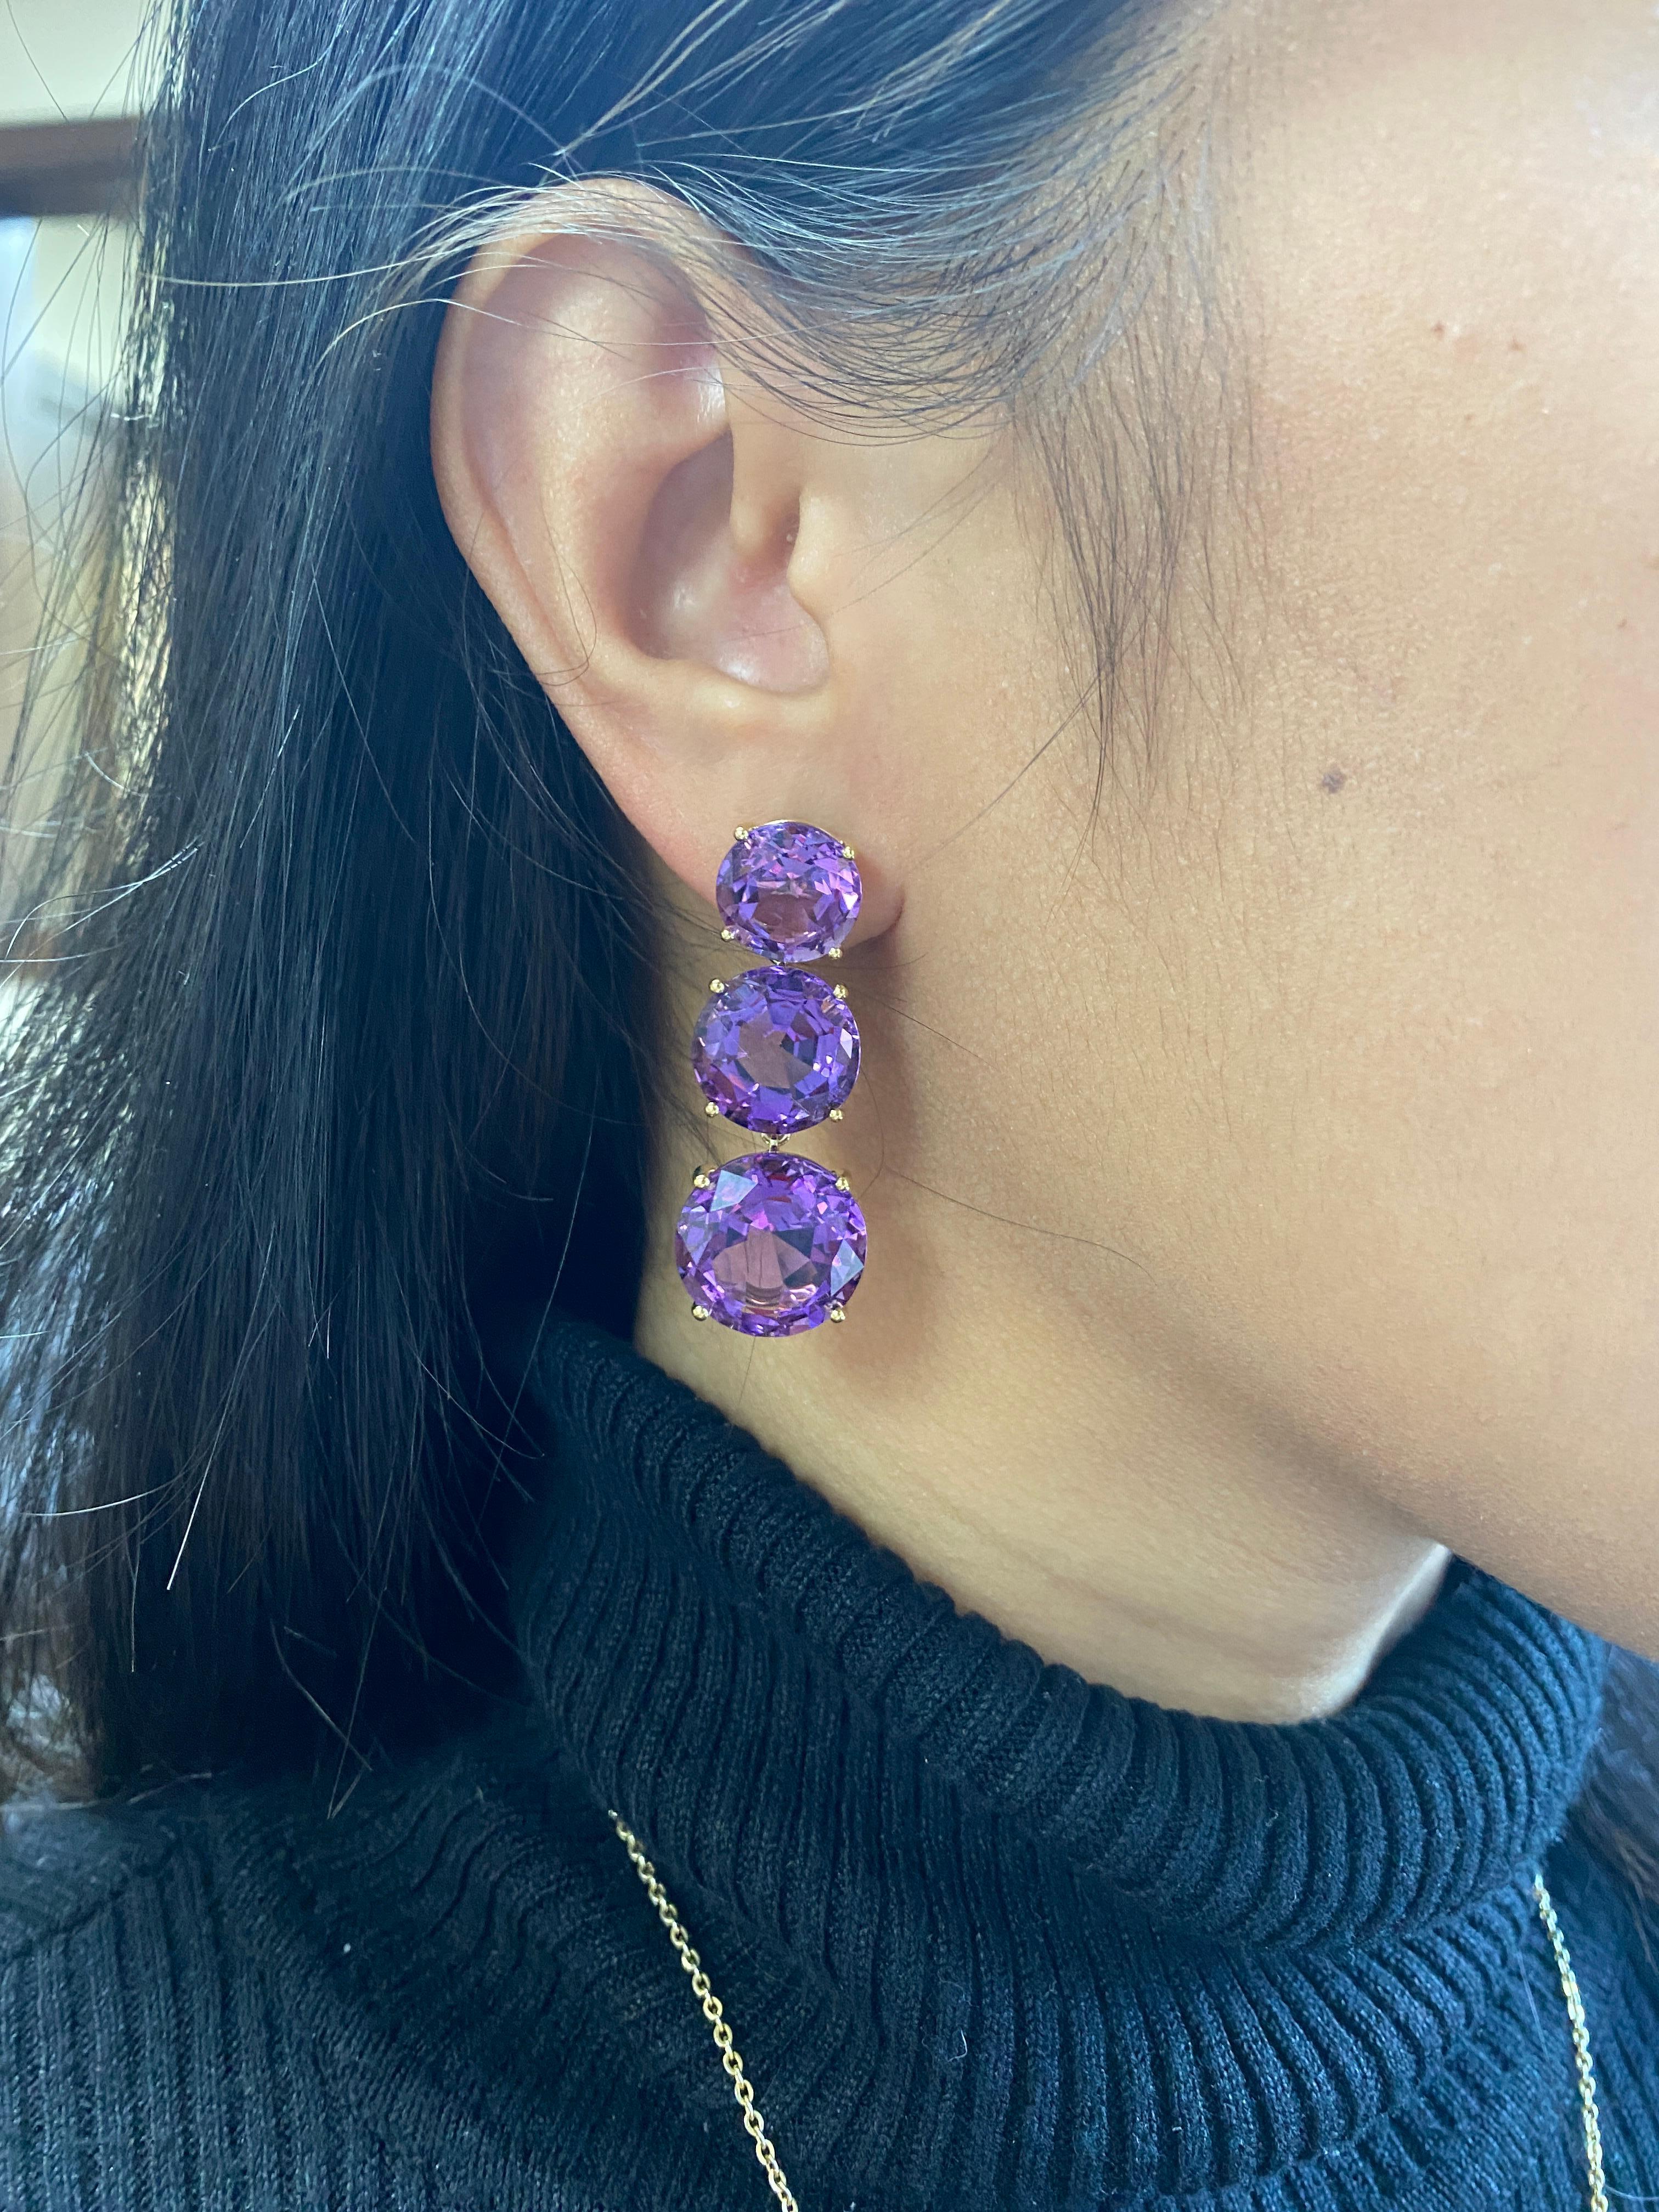 3 Tier Round Faceted Amethyst Earrings in 18k Yellow Gold, from ‘Gossip' Collection.  Like any good piece of gossip, this piece carries a hint of shock value.

* Gemstone size: 15, 13 & 11 mm
* Gemstone: 100% Earth Mined 
* Approx. gemstone Weight: